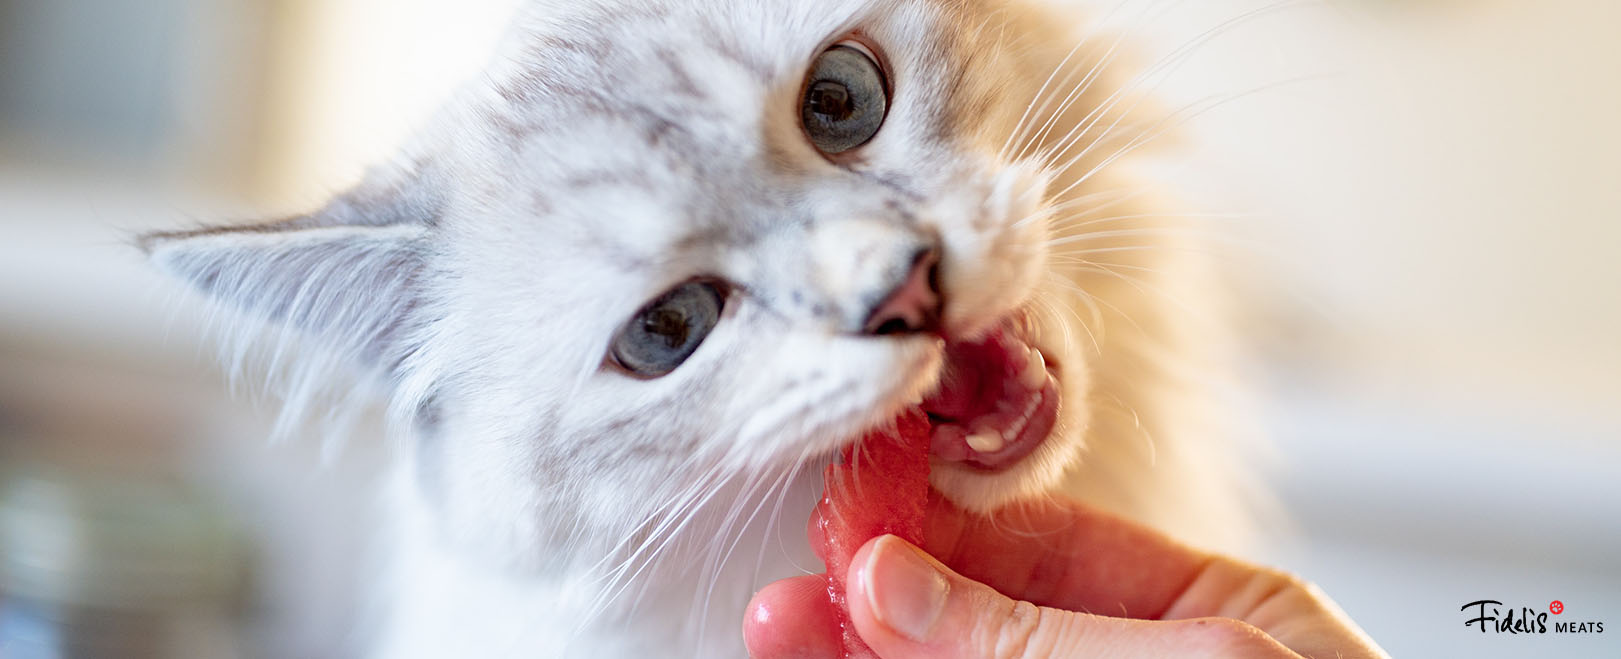 Introducing Your Cat To A Raw Cat Food Diet: Is It Safe?